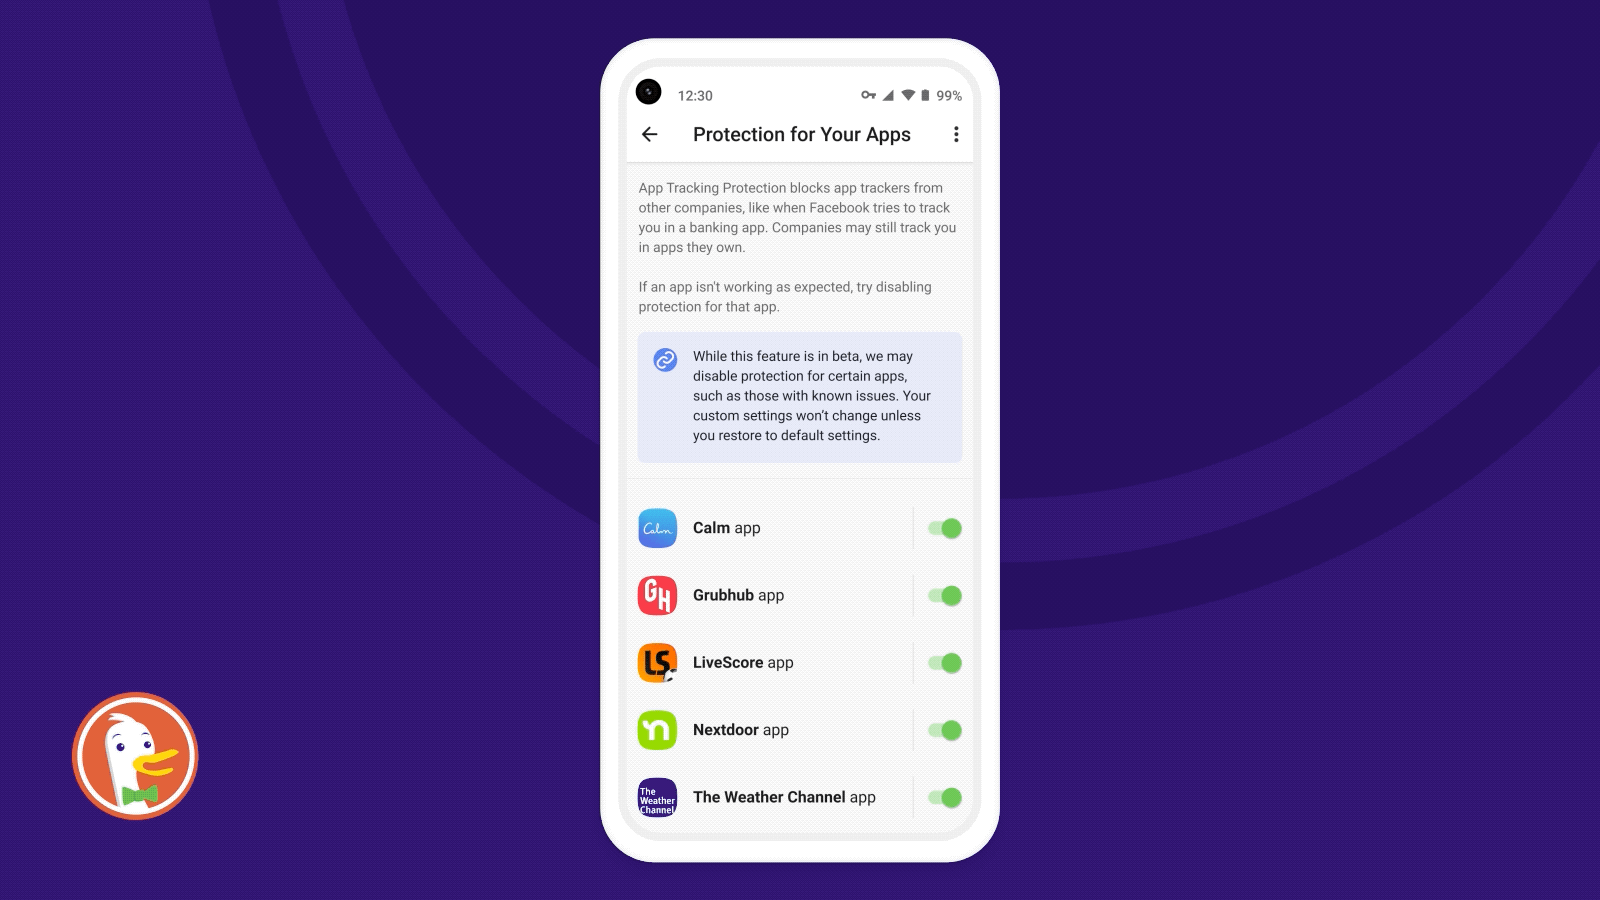 Introducing App Tracking Protection for Android: The easiest way to block most trackers lurking in your apps